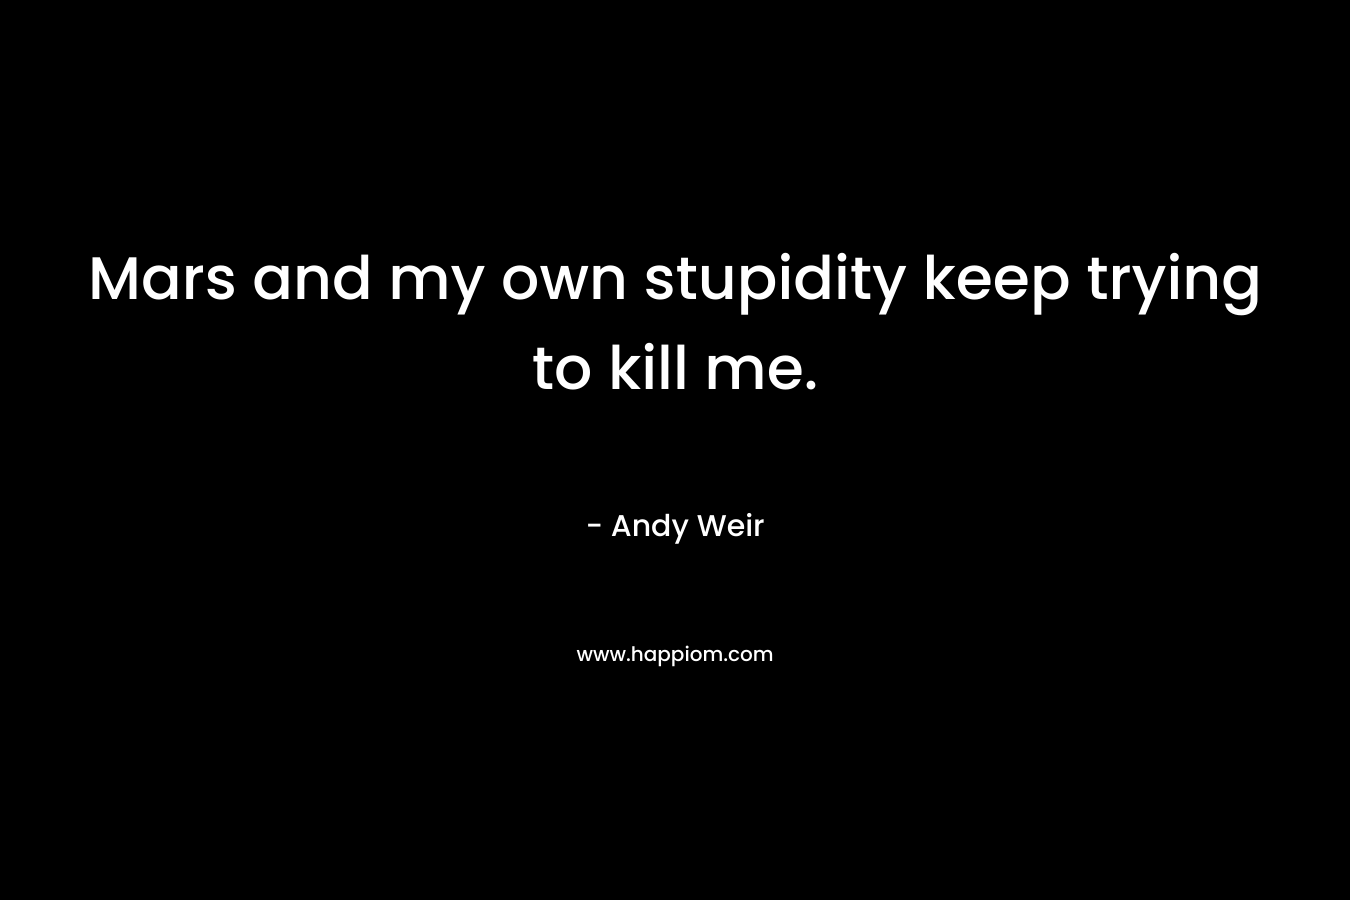 Mars and my own stupidity keep trying to kill me. – Andy Weir